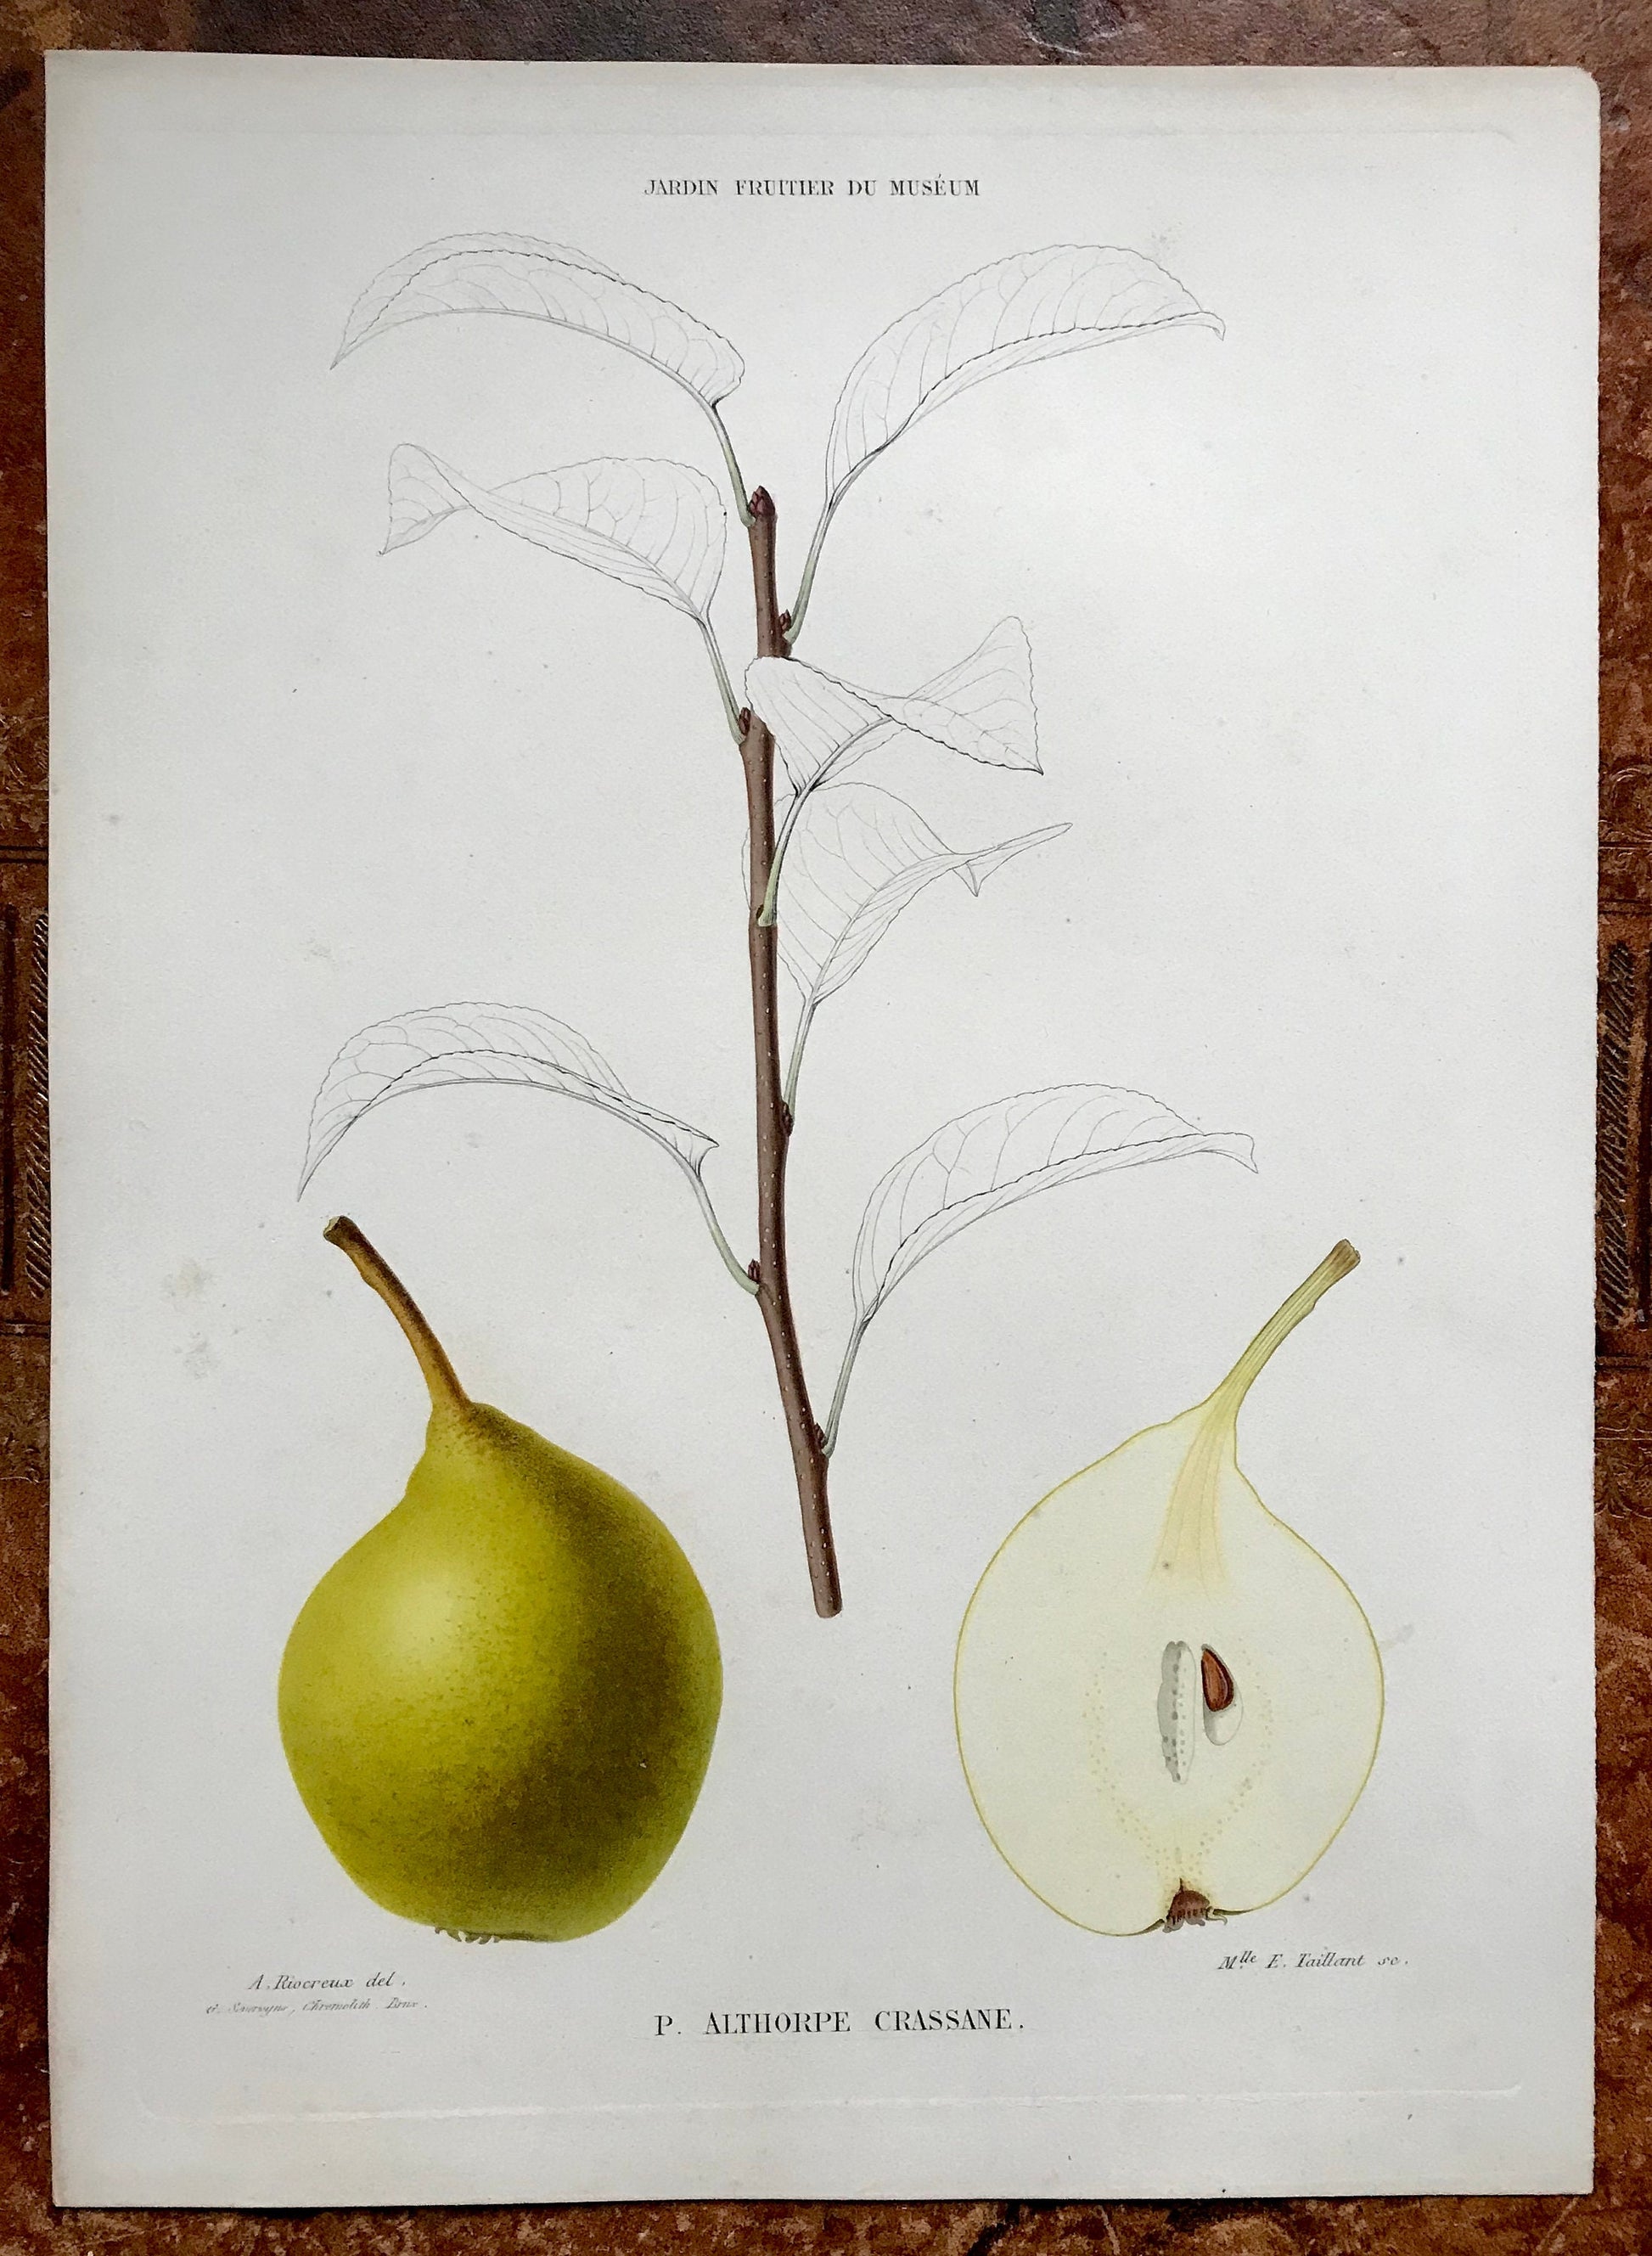 A Set of 6 Original Steel Engravings of Pears. French c. 1865. From Le Jardin Fruitier du Museum by Decaisne. 31.5 x 22.5 cms.